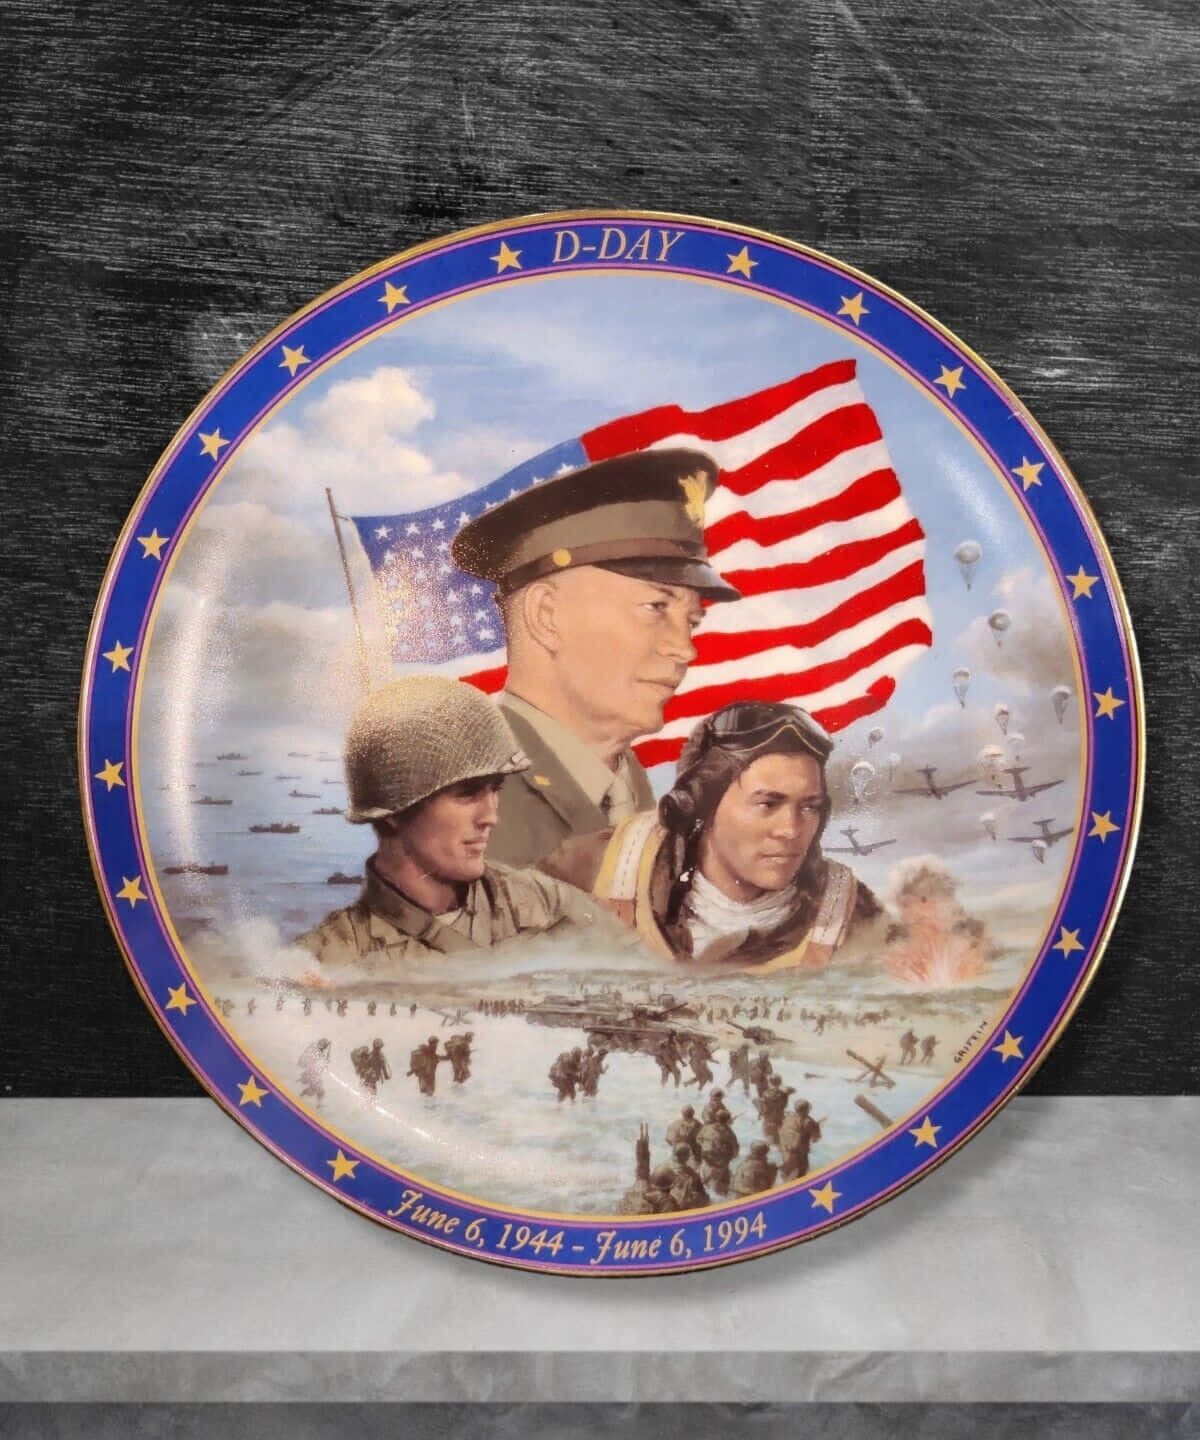 A Plate With A Picture Of A Soldier And An American Flag